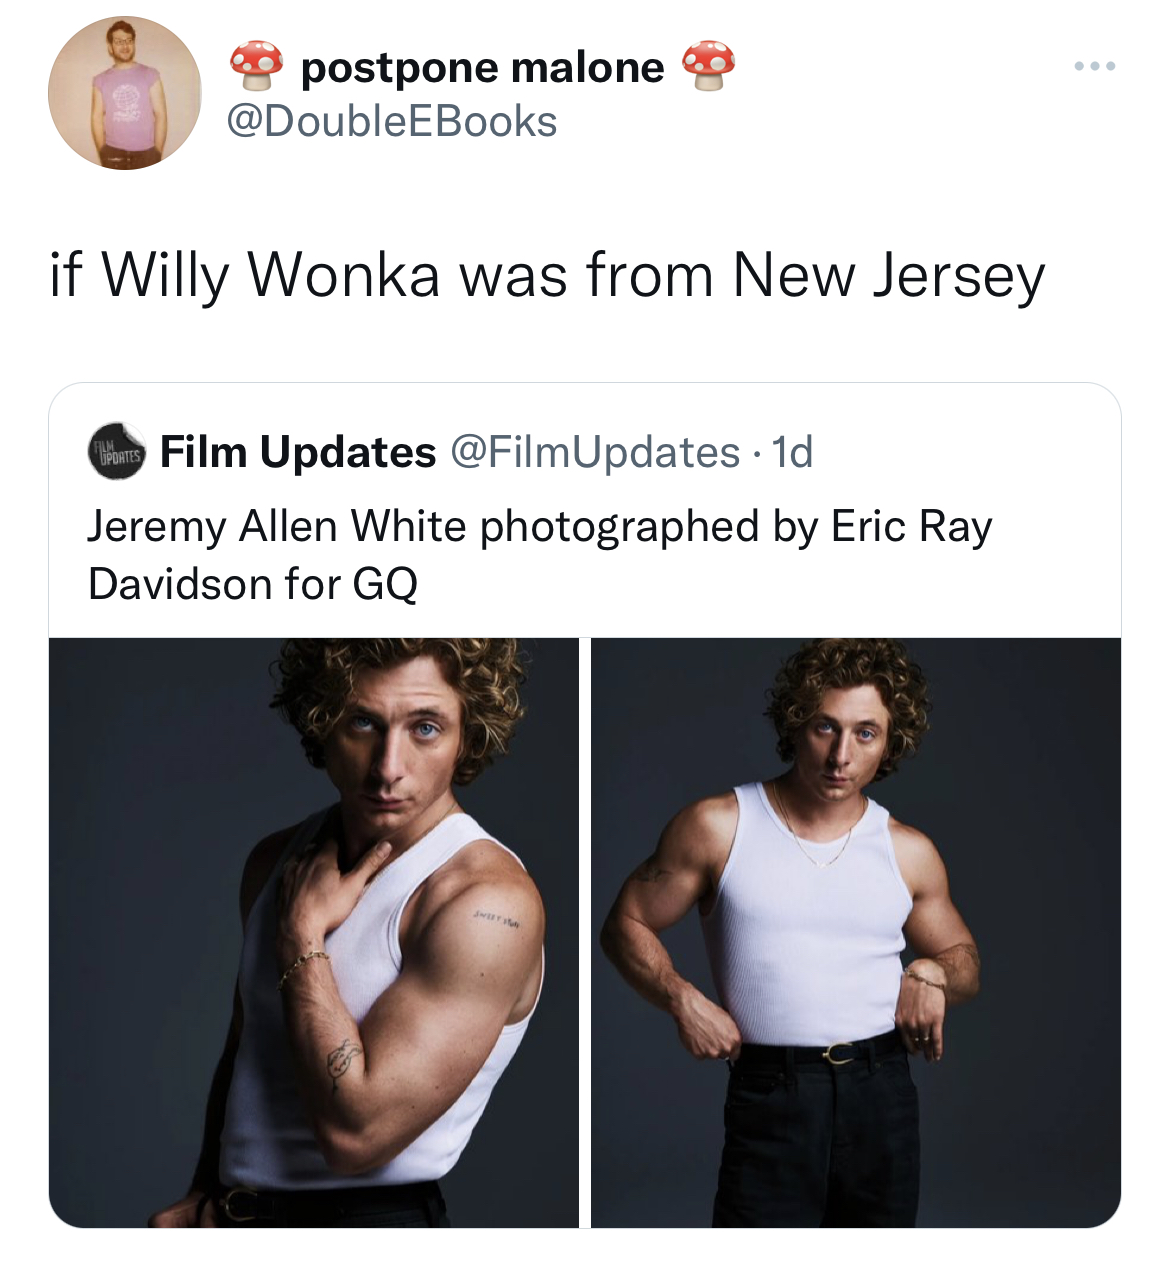 tweets roasting celebs - shoulder - postpone malone if Willy Wonka was from New Jersey Film Updates . 1d Jeremy Allen White photographed by Eric Ray Davidson for Gq